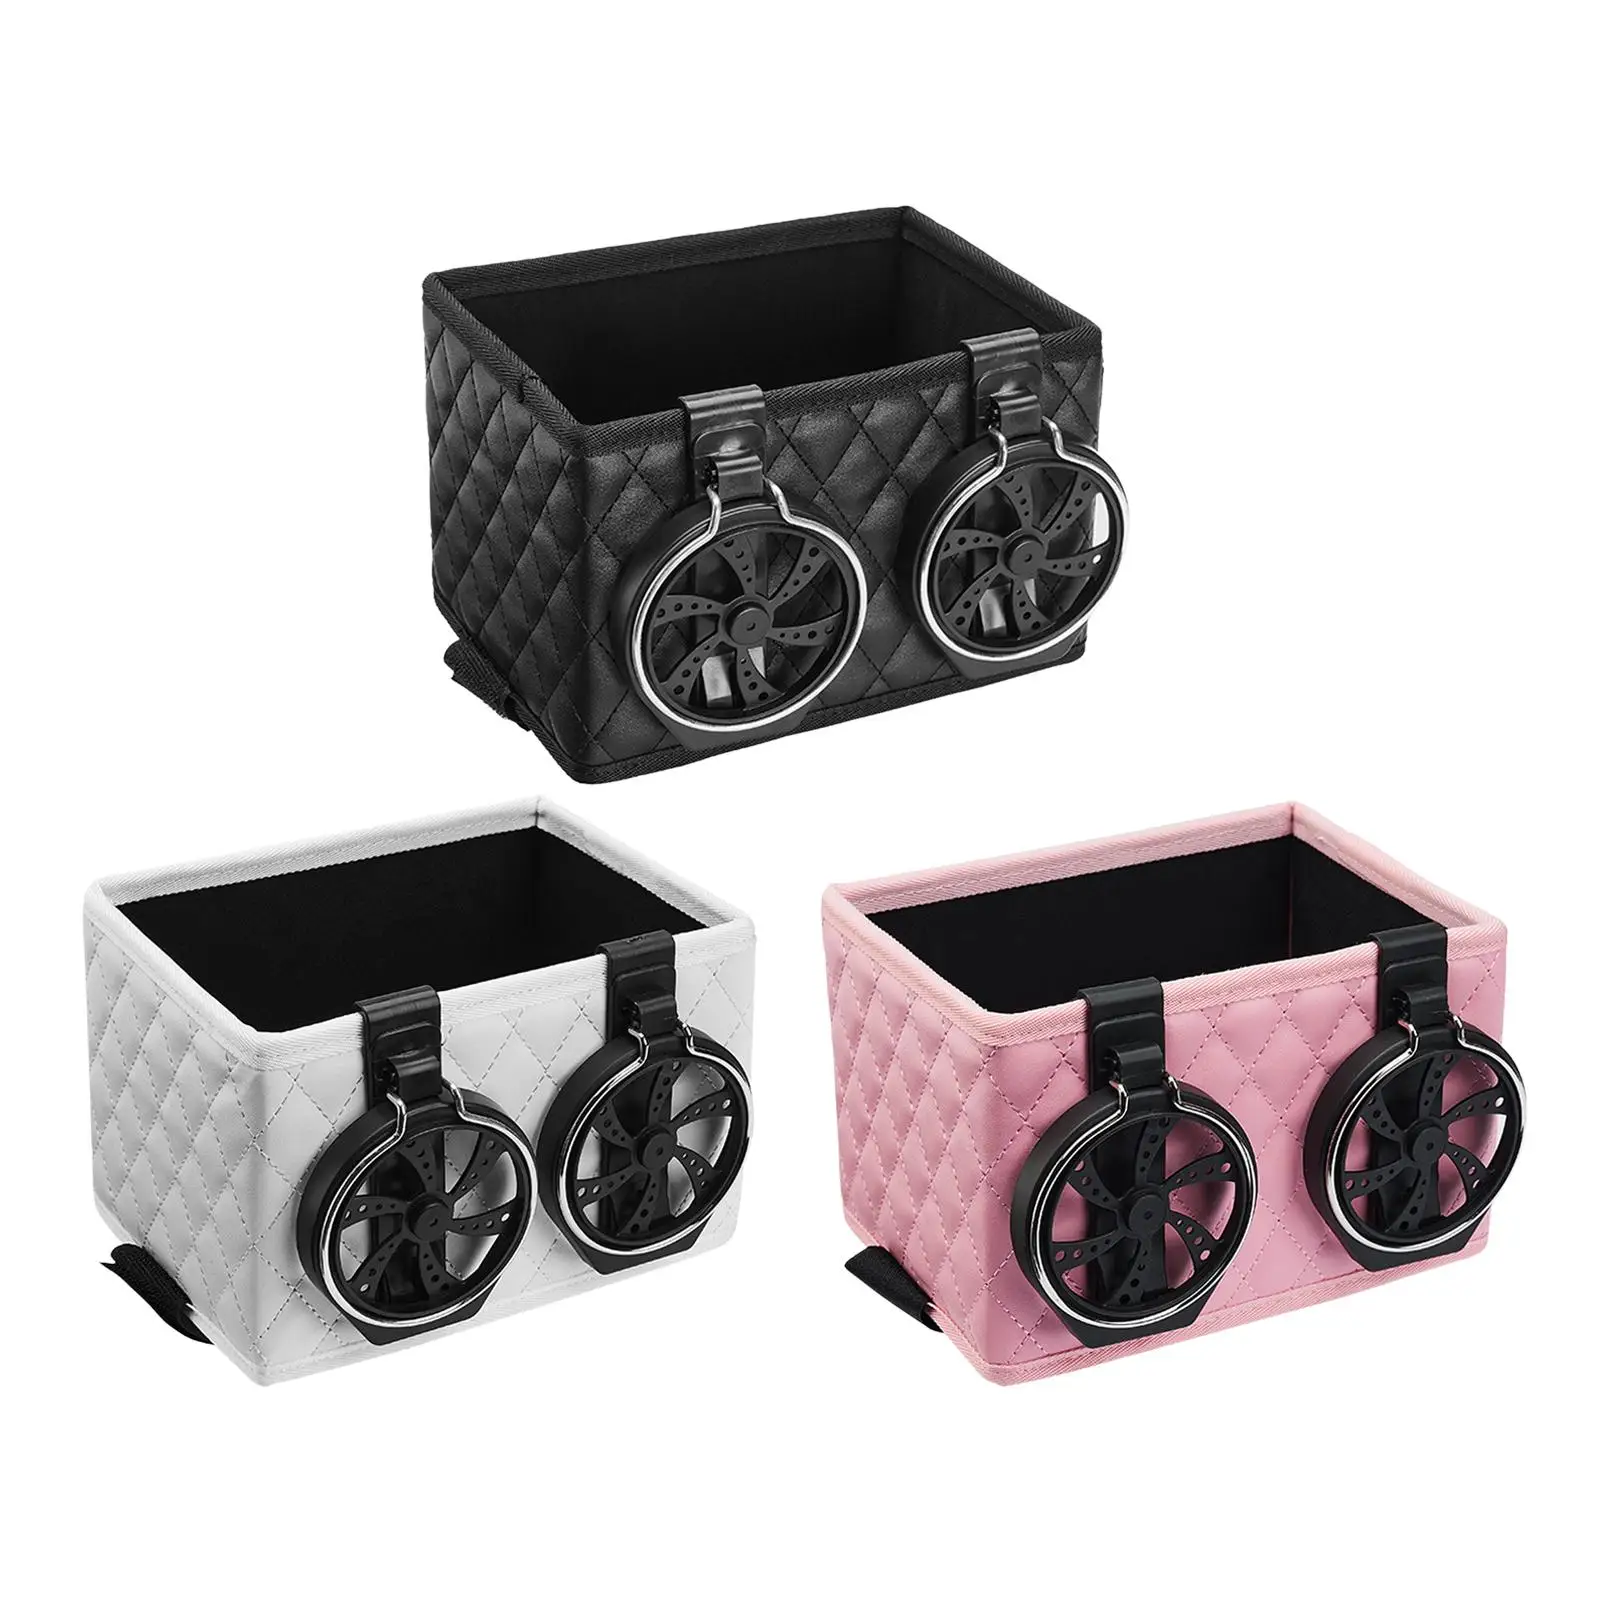 Cup Holder Multifunctional car Console Foldable Gadgets Holder Tissue Box Car Armrest Storage Box for Paper Towels Cellphones